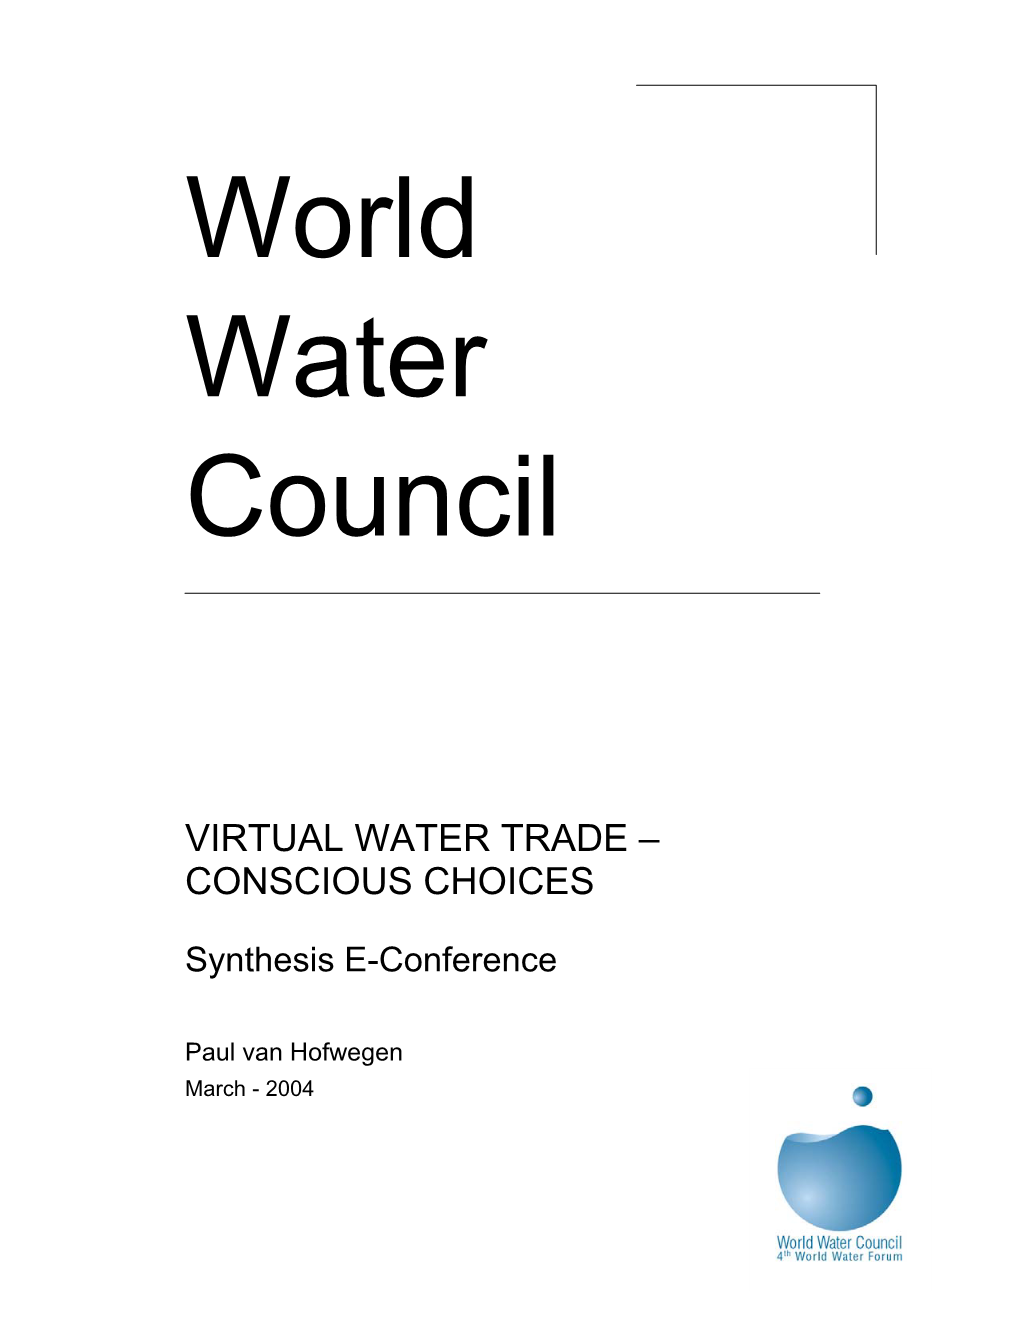 World Water Council Is Engaged in Stimulating Debate and Research on the Implications of Using Virtual Water Trade As a Strategic Instrument in Water Policy